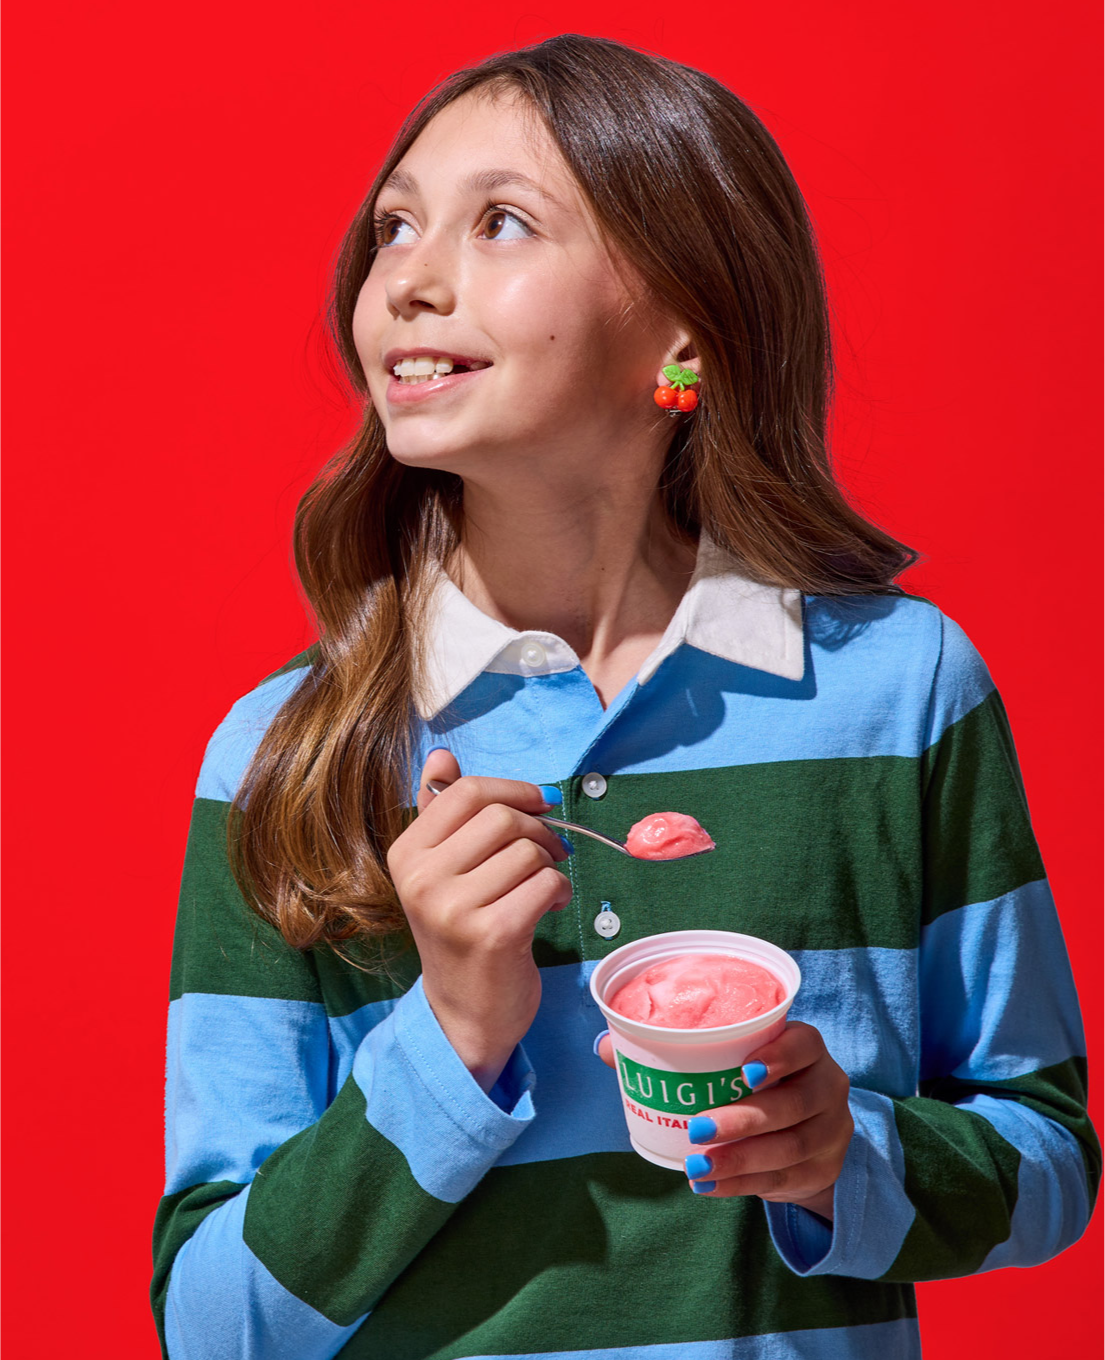 Young girl eating cherry LUIGI'S Real Italian Ice. She is wearing a blue and green rugby shirt and cherry earrings. She's looking over her shoulder, smiling, and holding the cup and spoon in her hand with cherry Italian ice.